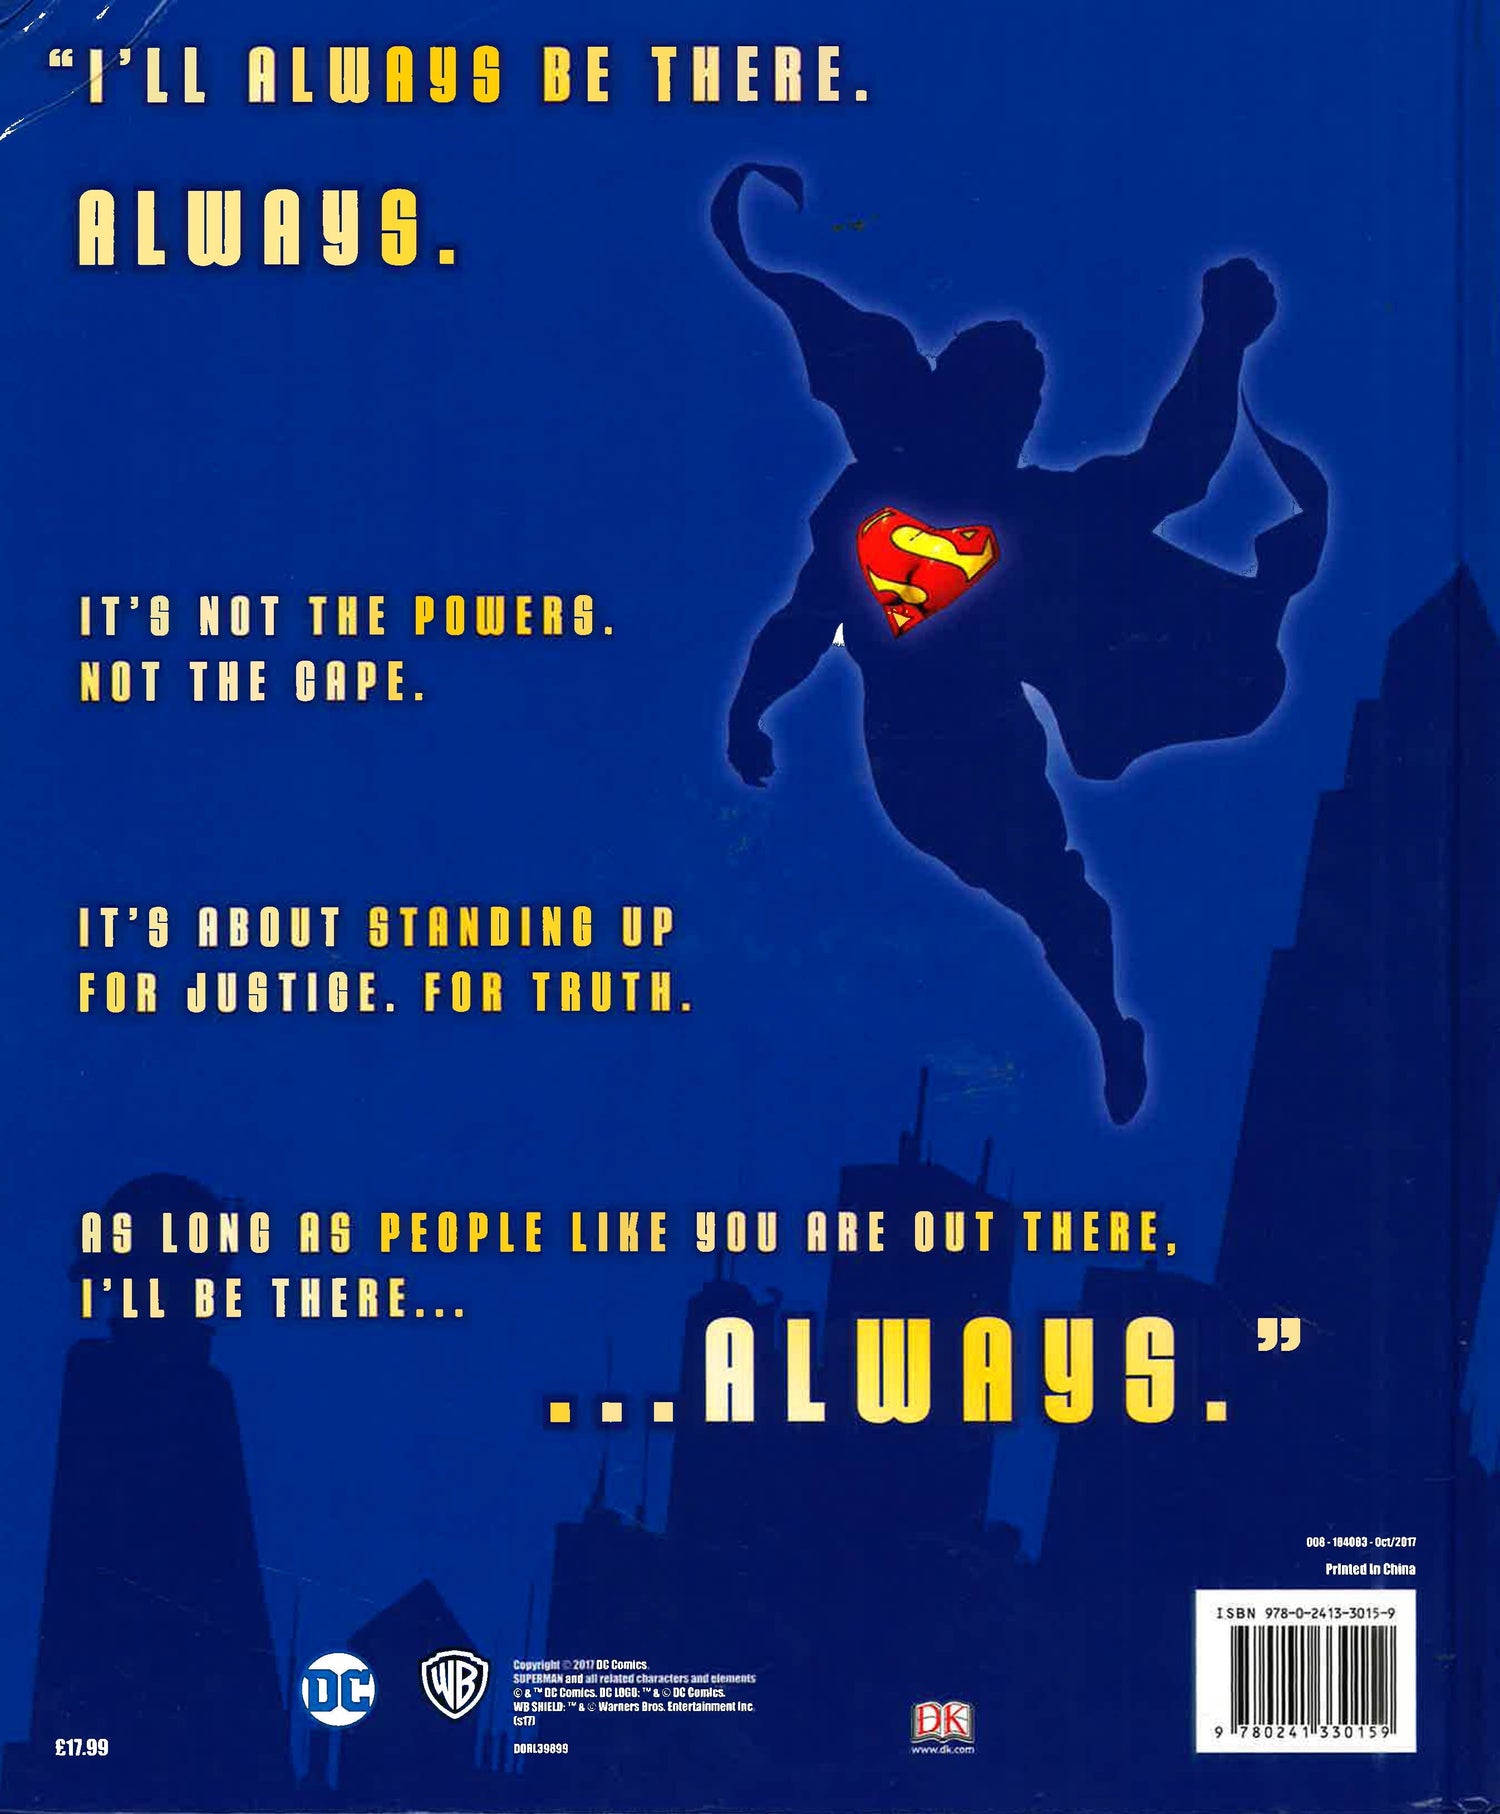 Superman: The Ultimate Guide to the Man of Steel (DK Superman): Wallace,  Daniel: 9781465408754: : Books